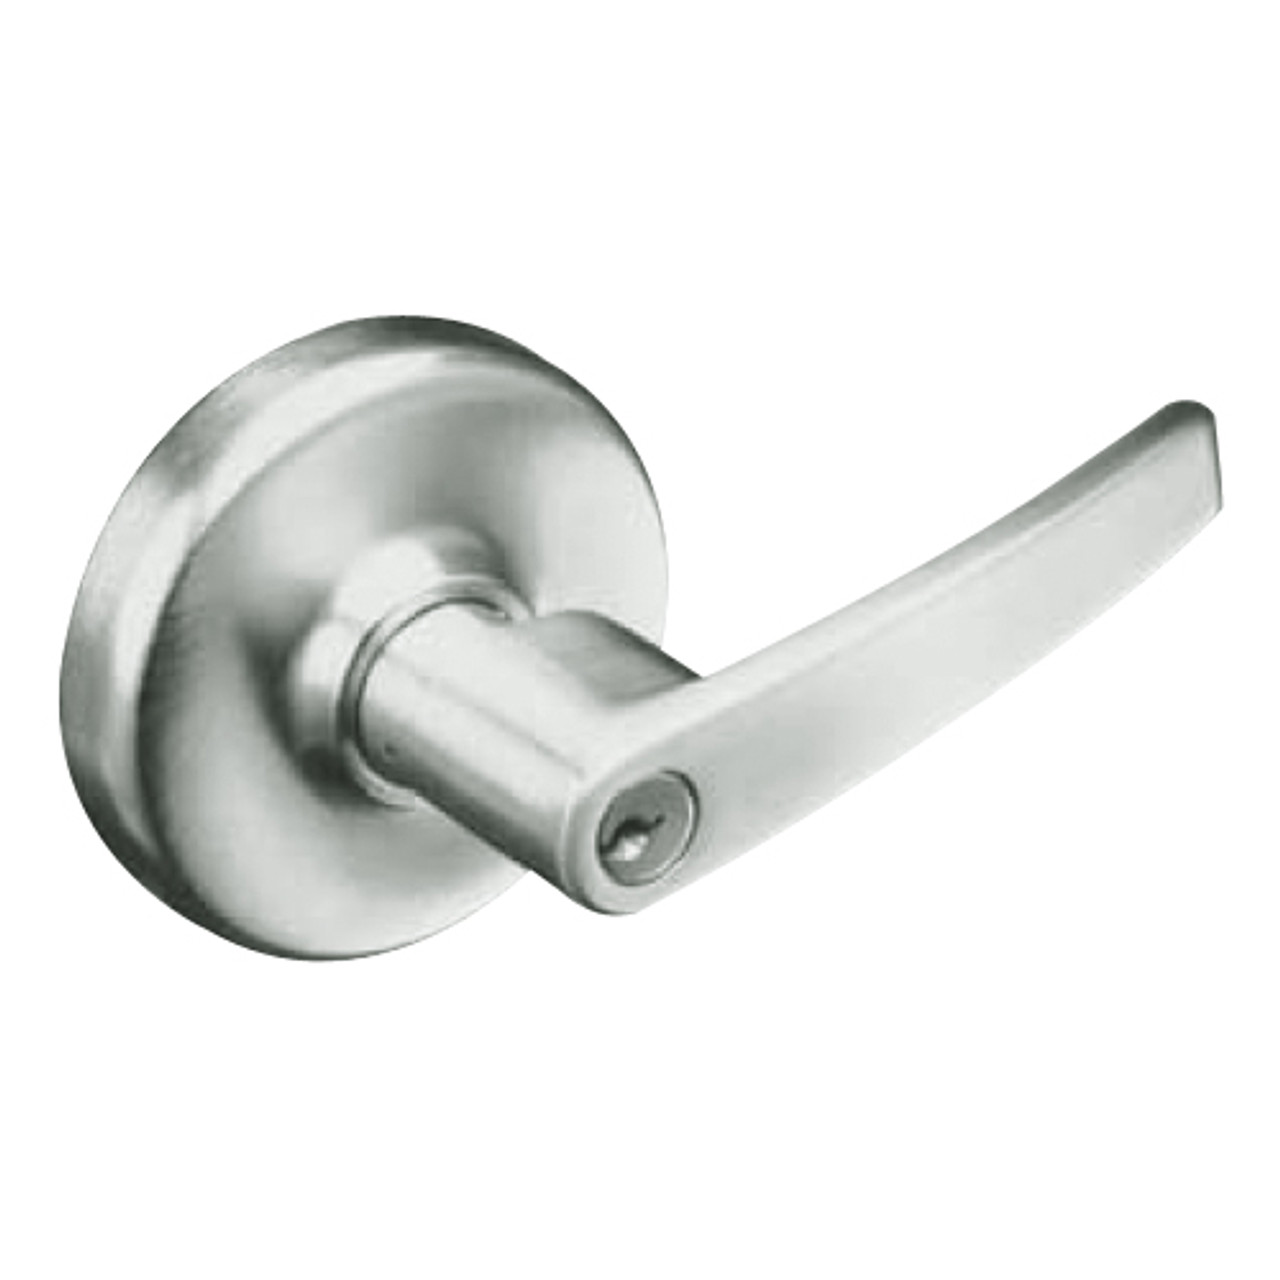 CL3161-AZD-618 Corbin CL3100 Series Vandal Resistant Entrance Cylindrical Locksets with Armstrong Lever in Bright Nickel Plated Finish